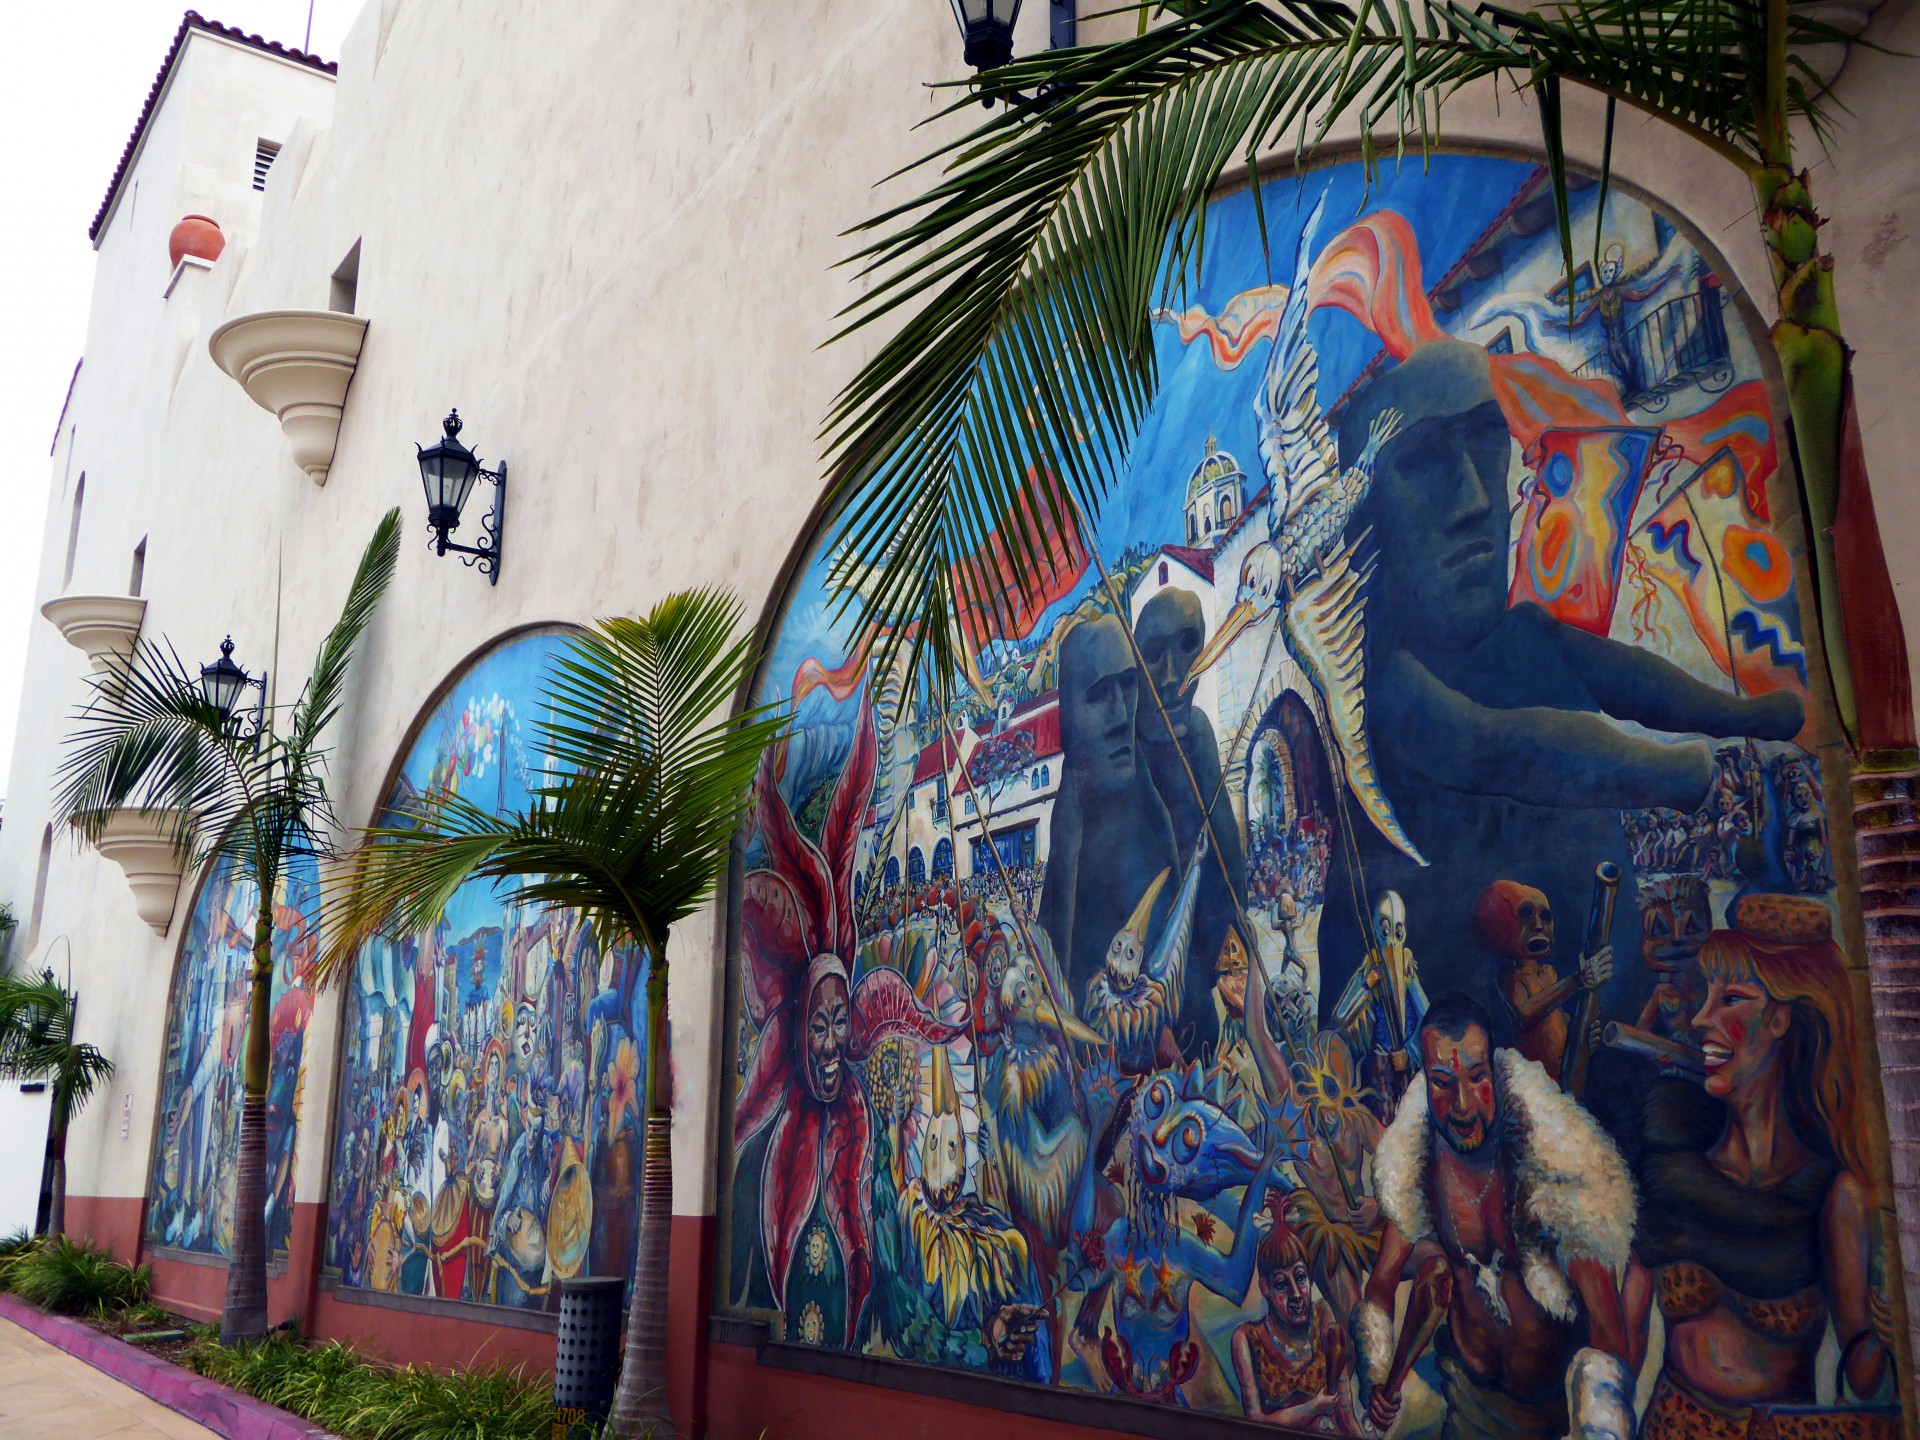 Mural On Stucco Building